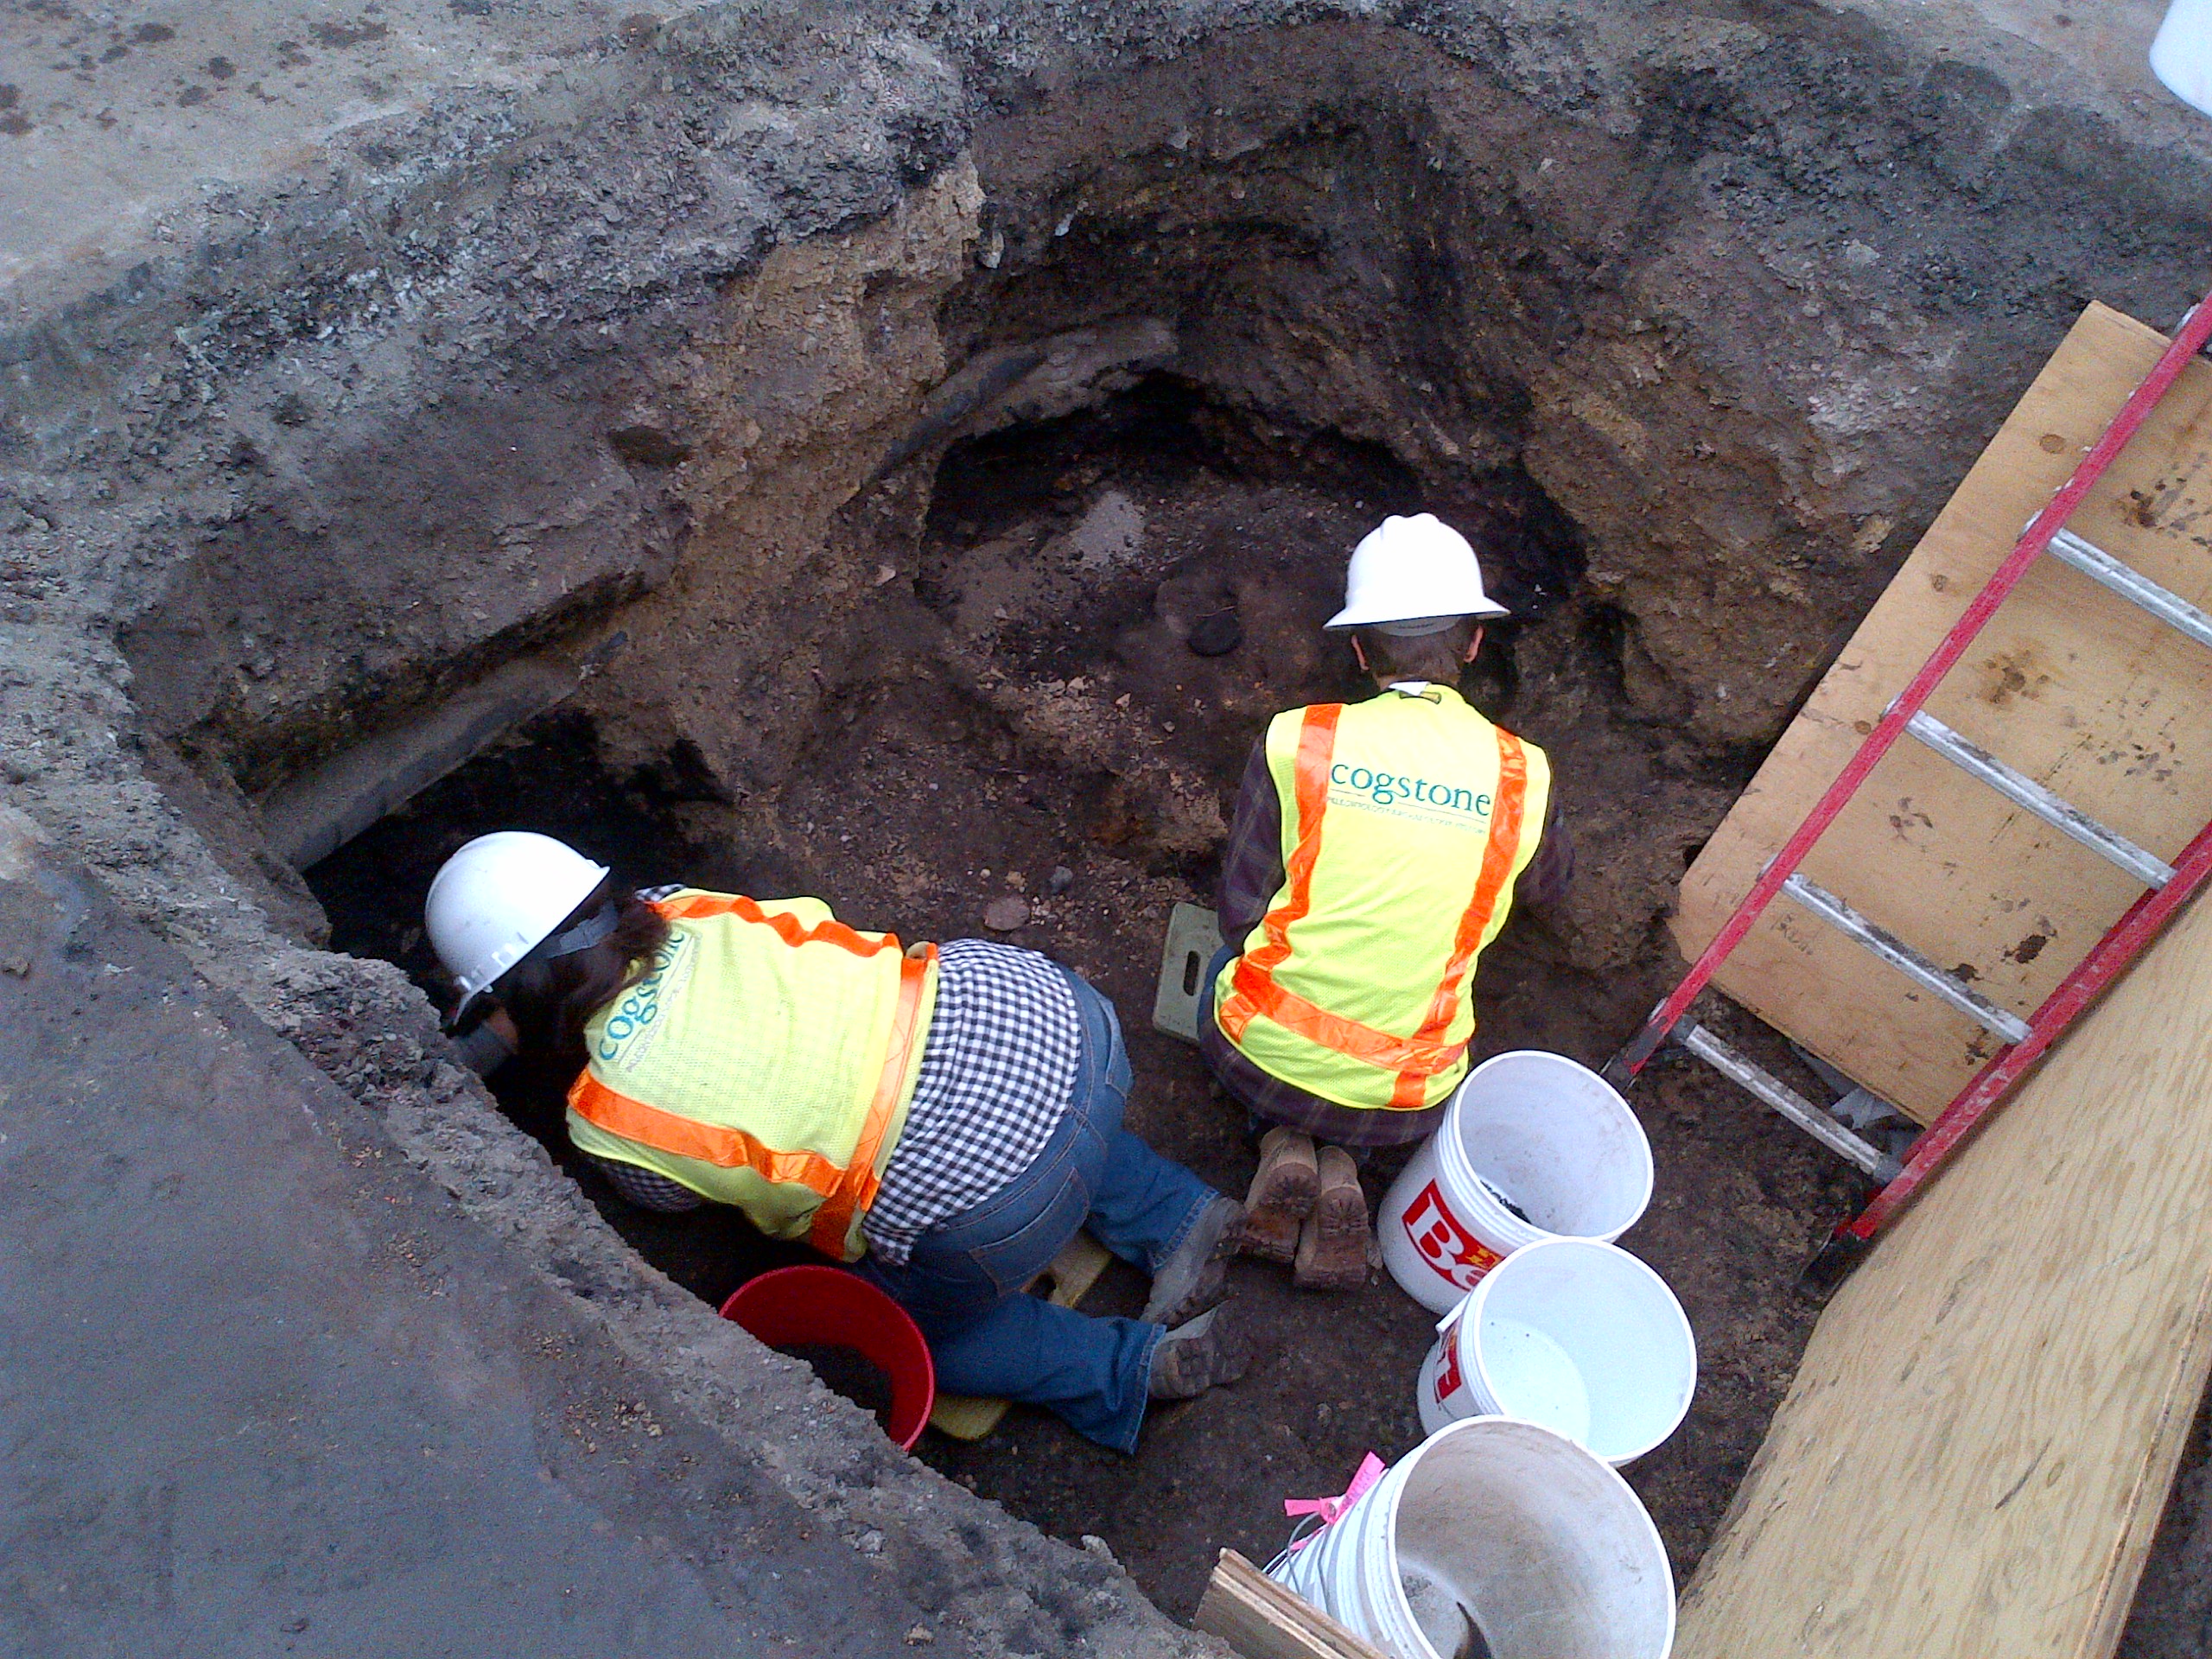 Two archeologists during an excavation, several feet deep in the ground.